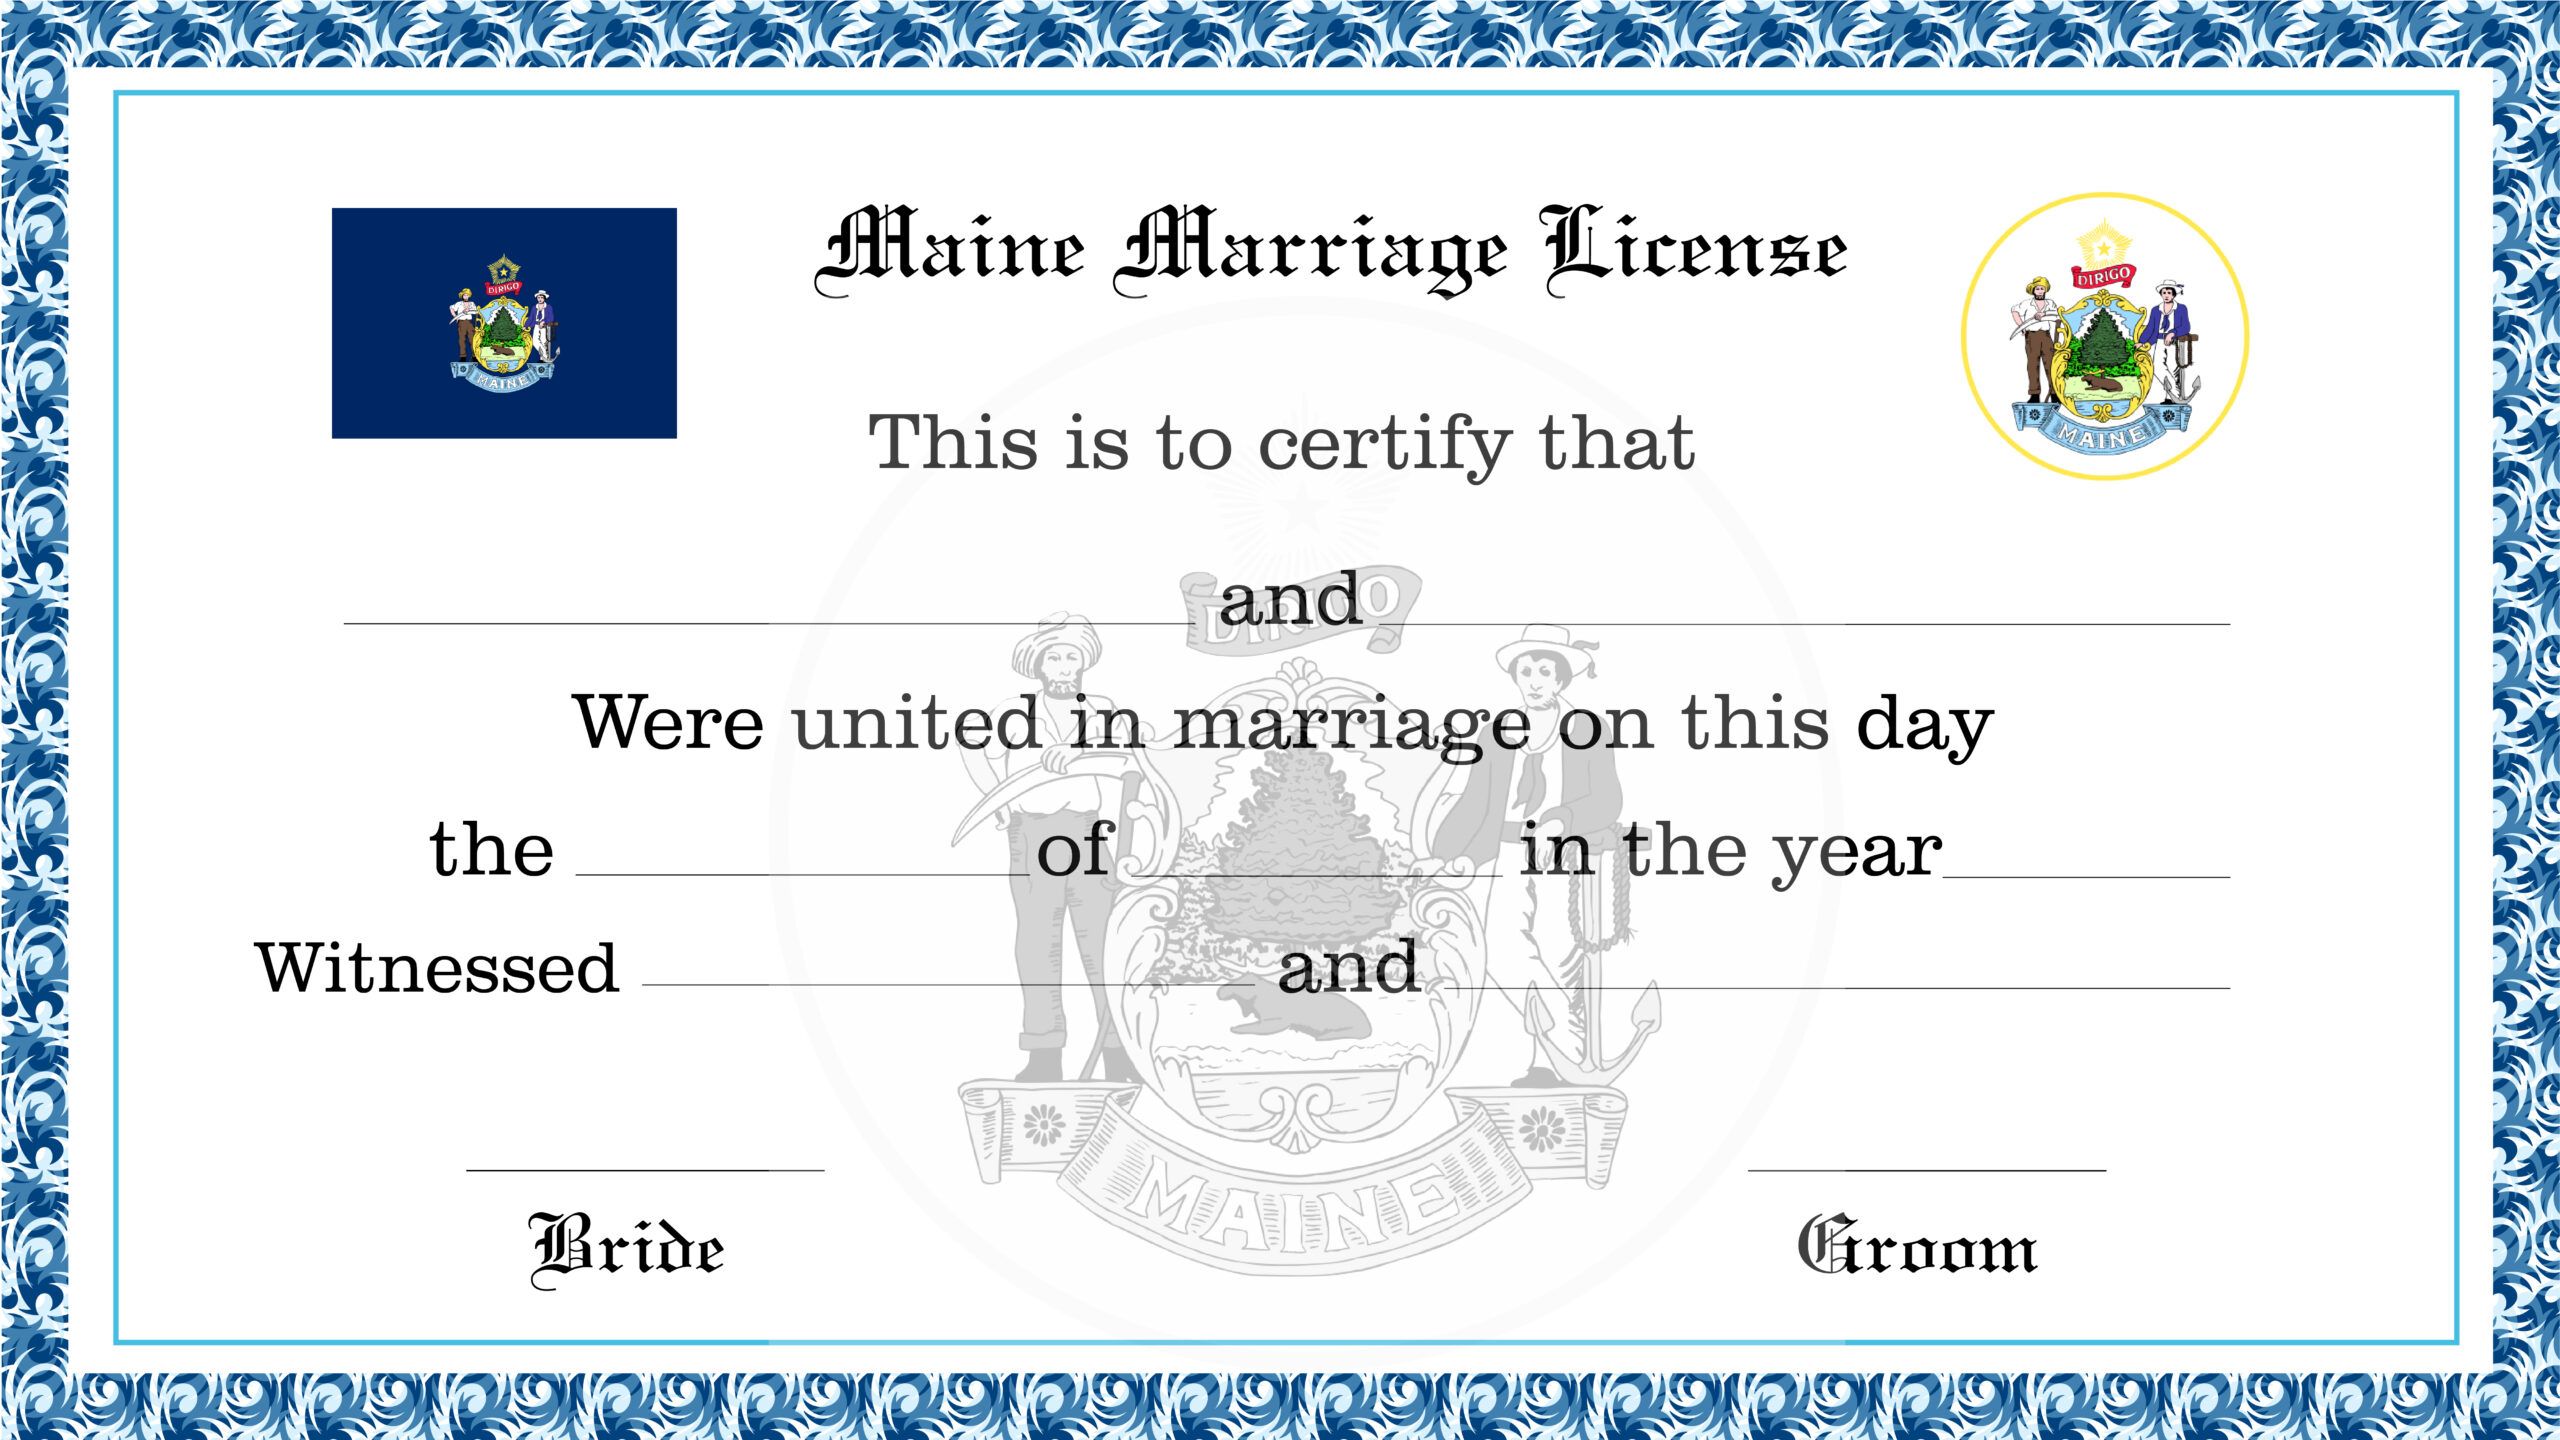 Maine Marriage License License Lookup